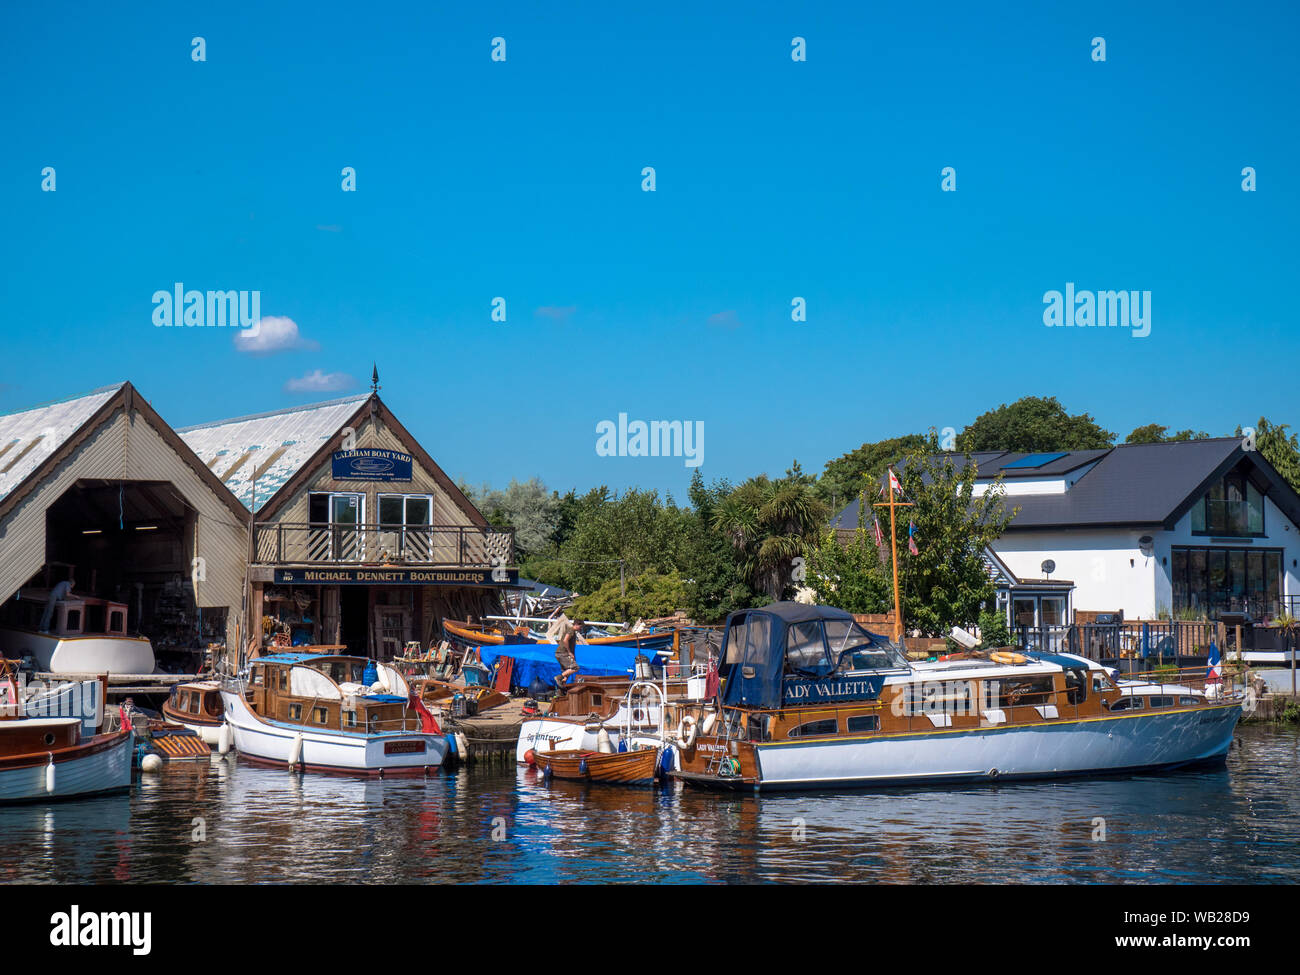 Traditionelle Bootsbauer, Laleham Staines, River Thames, Surrey, England, UK, GB. Stockfoto